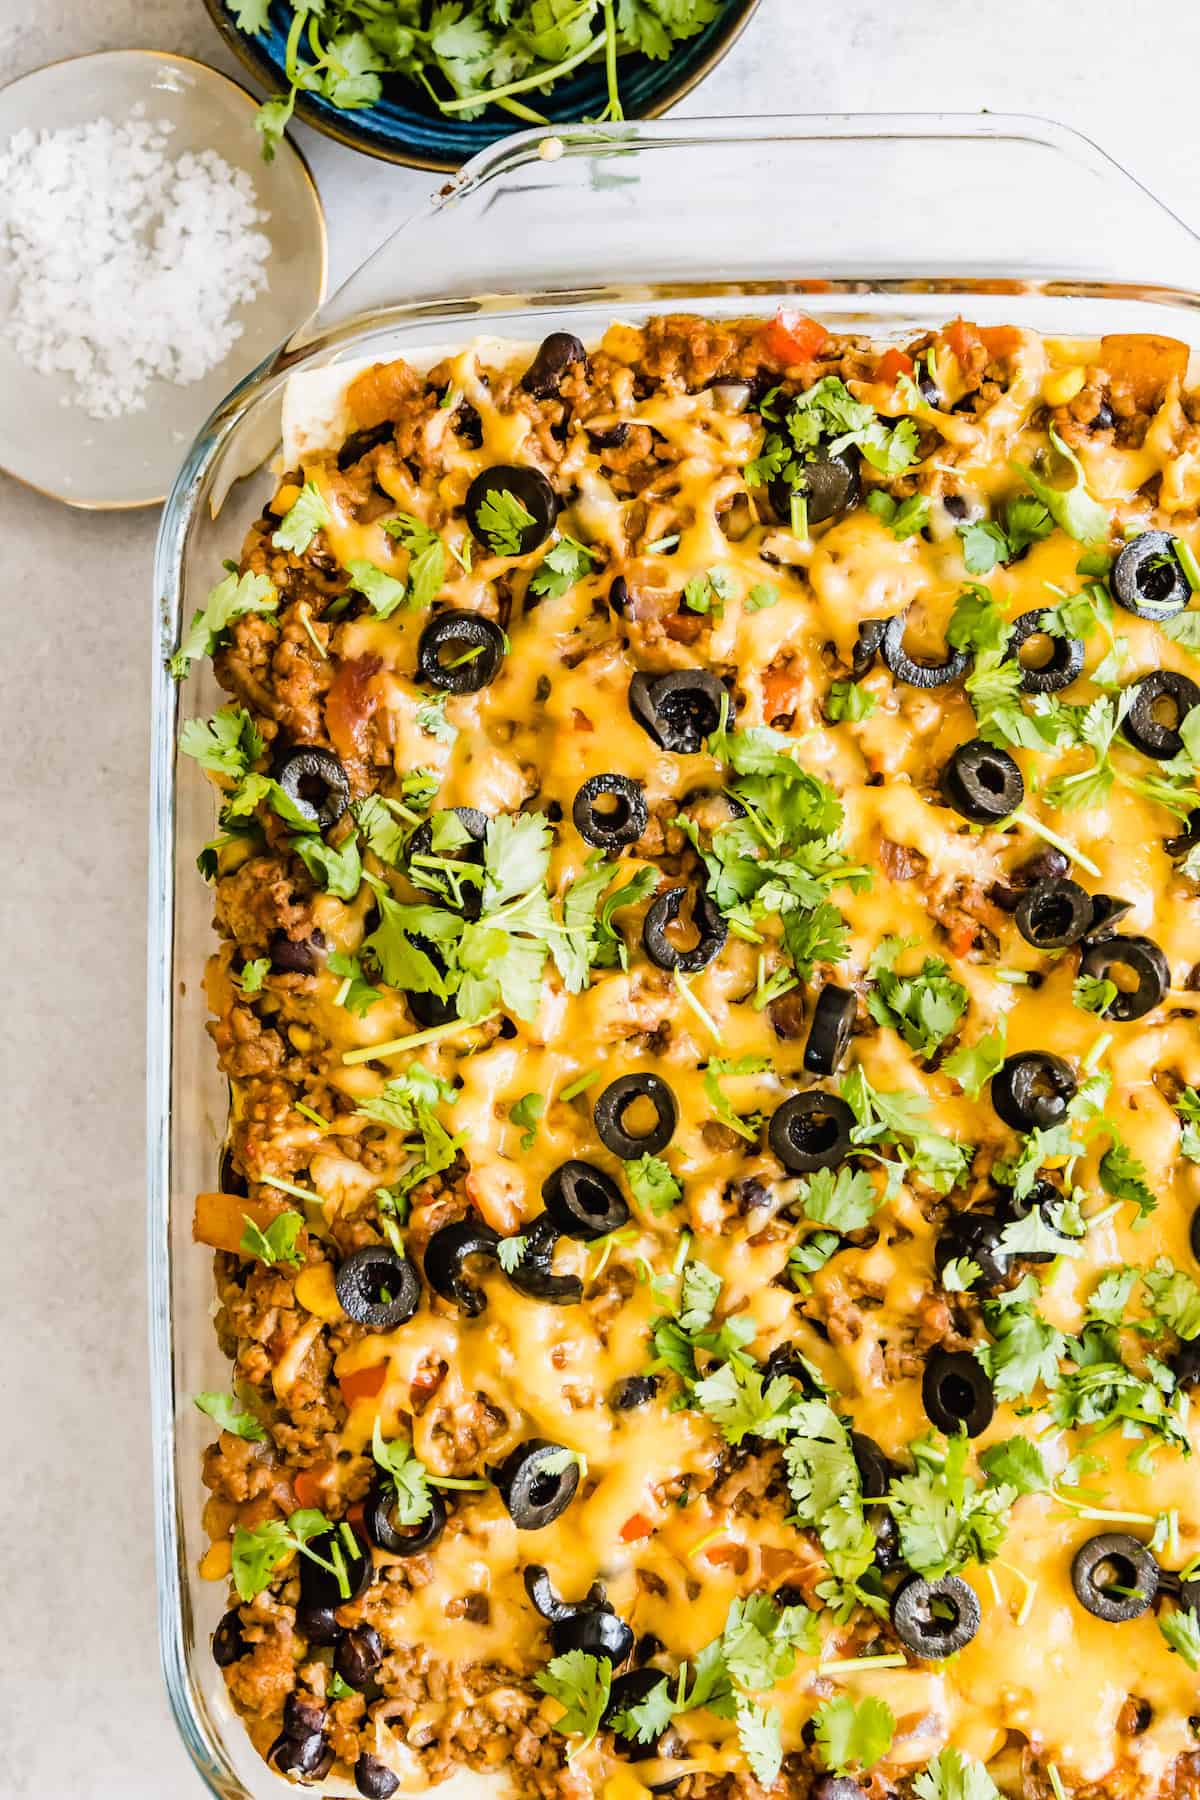 A Mexican Lasagna Casserole in a Clear Baking Dish